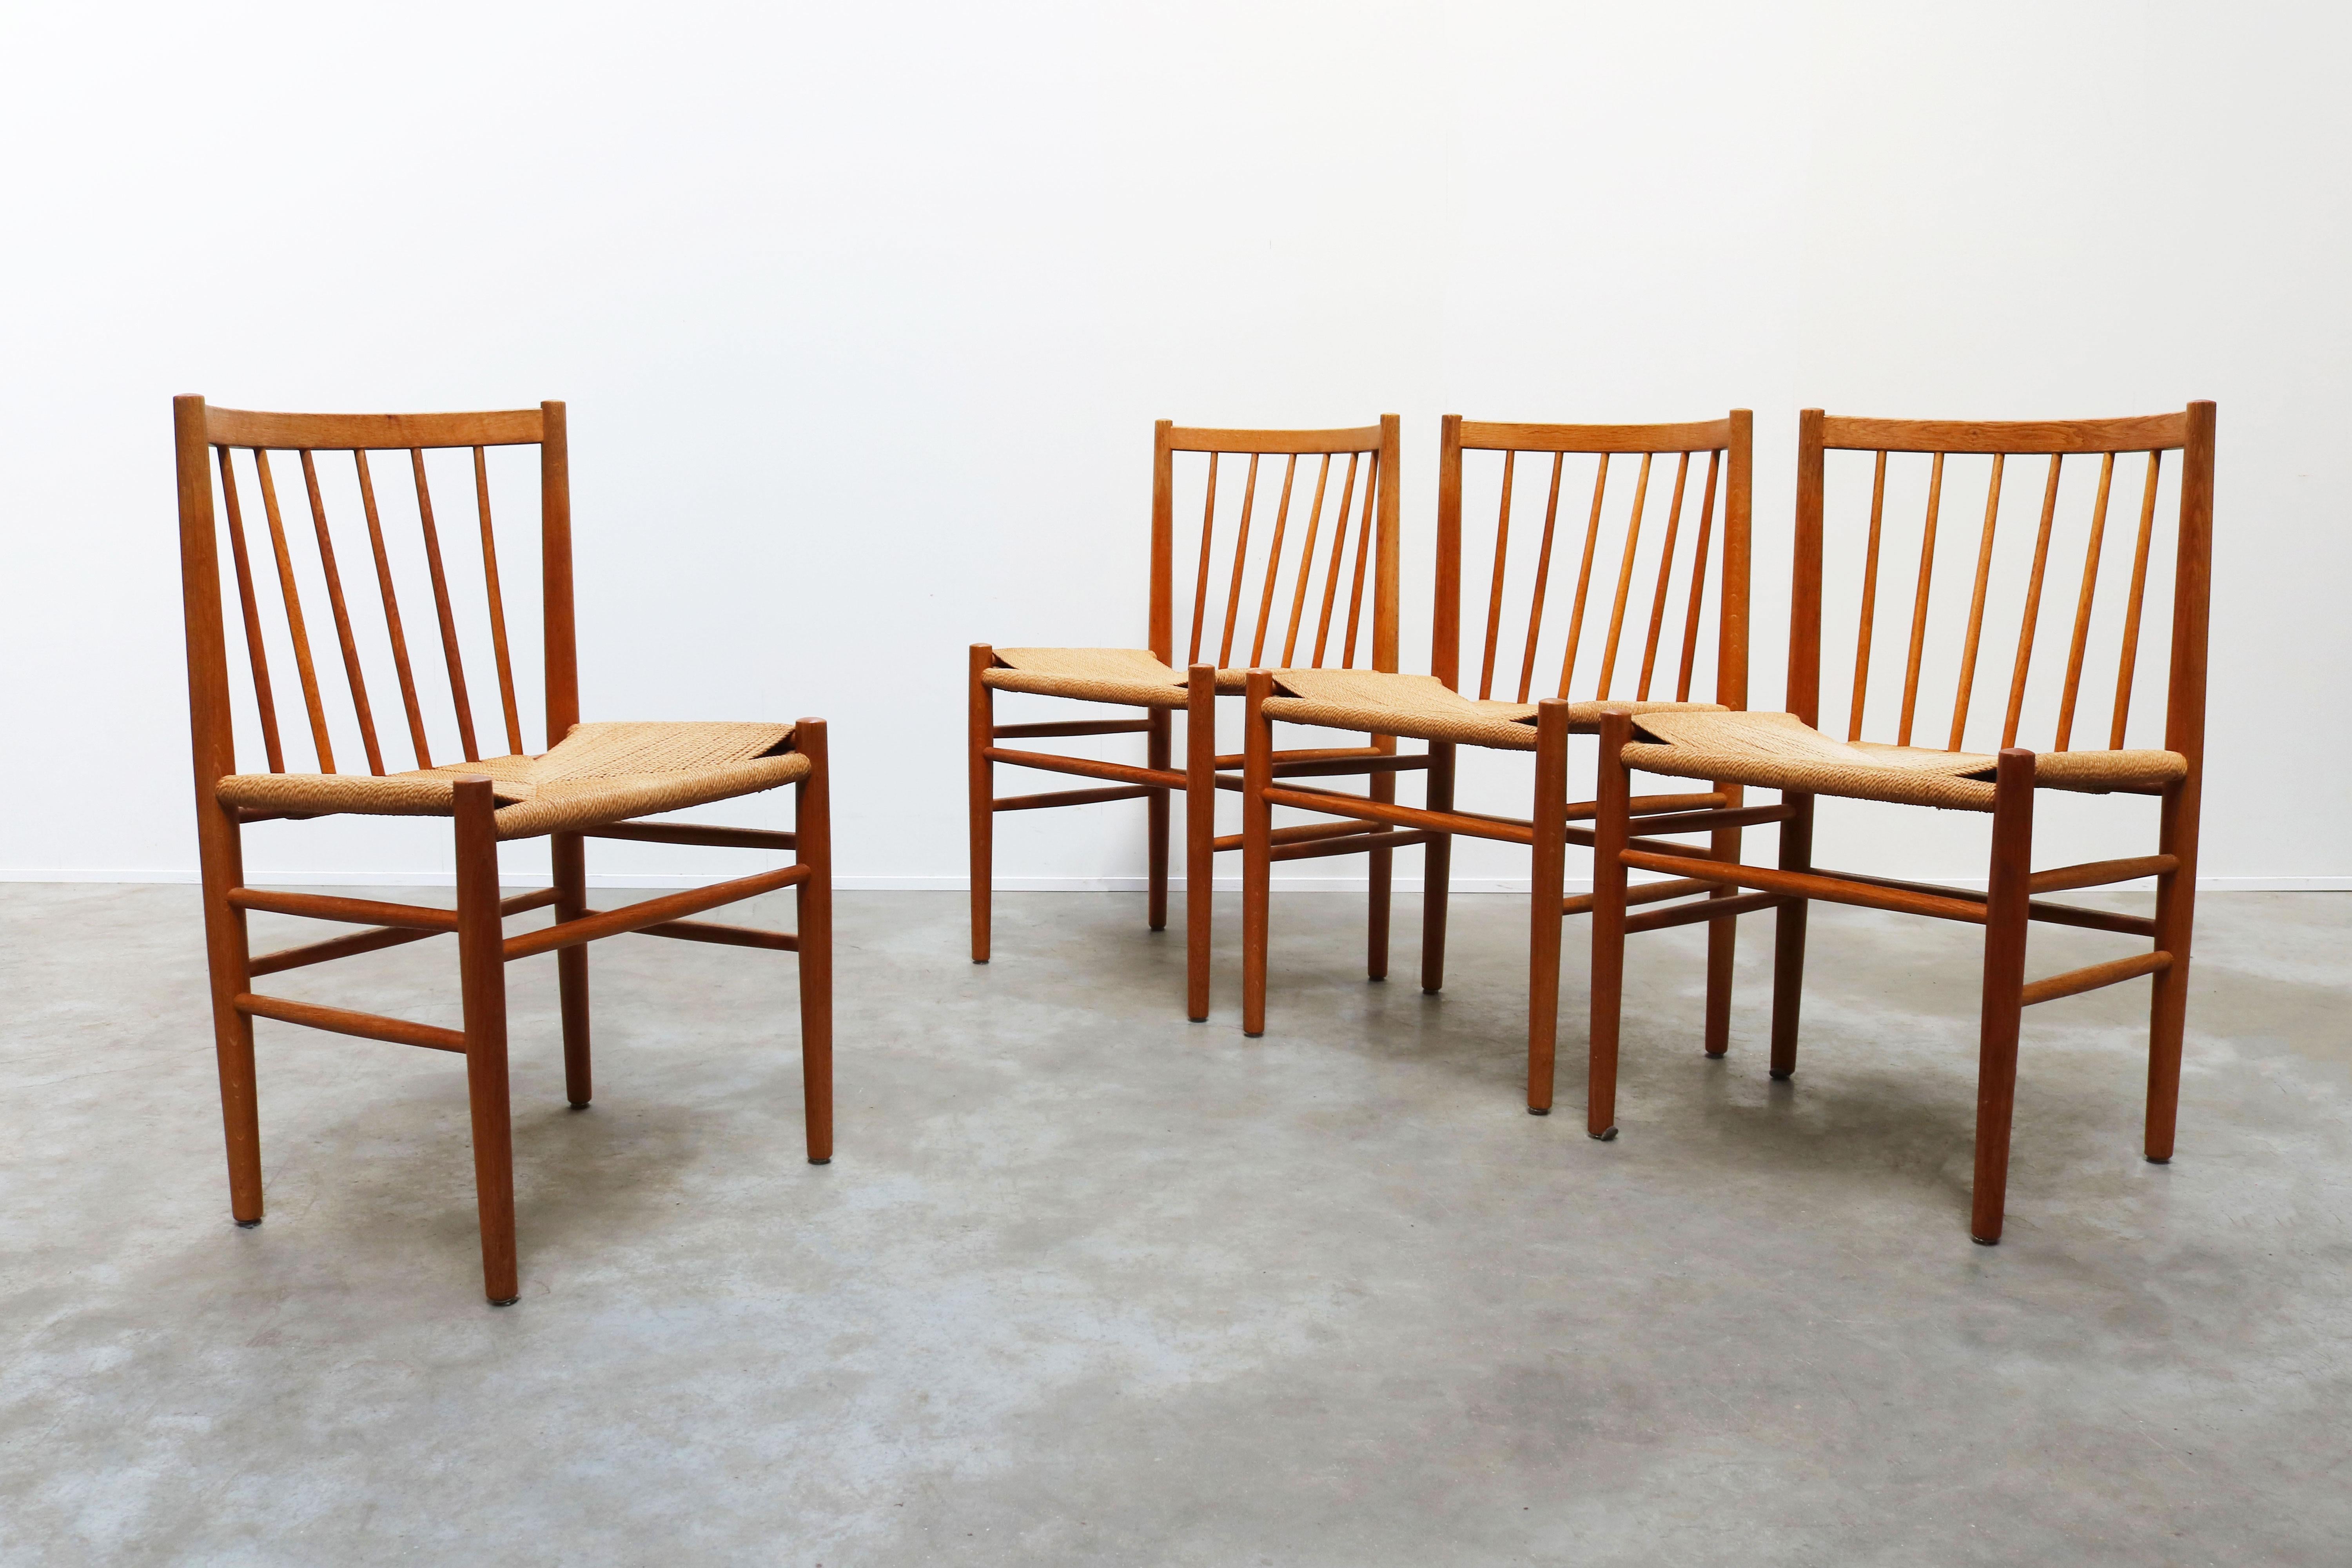 Rare set of four dining chairs model: J80 designed by Jorgen Baekmark for FDM Møbler in the 1950s. The chairs are made out of solid oak with handwoven papercord. Gorgeous Minimalist Shaker style design. The chairs look amazing with the unique curved